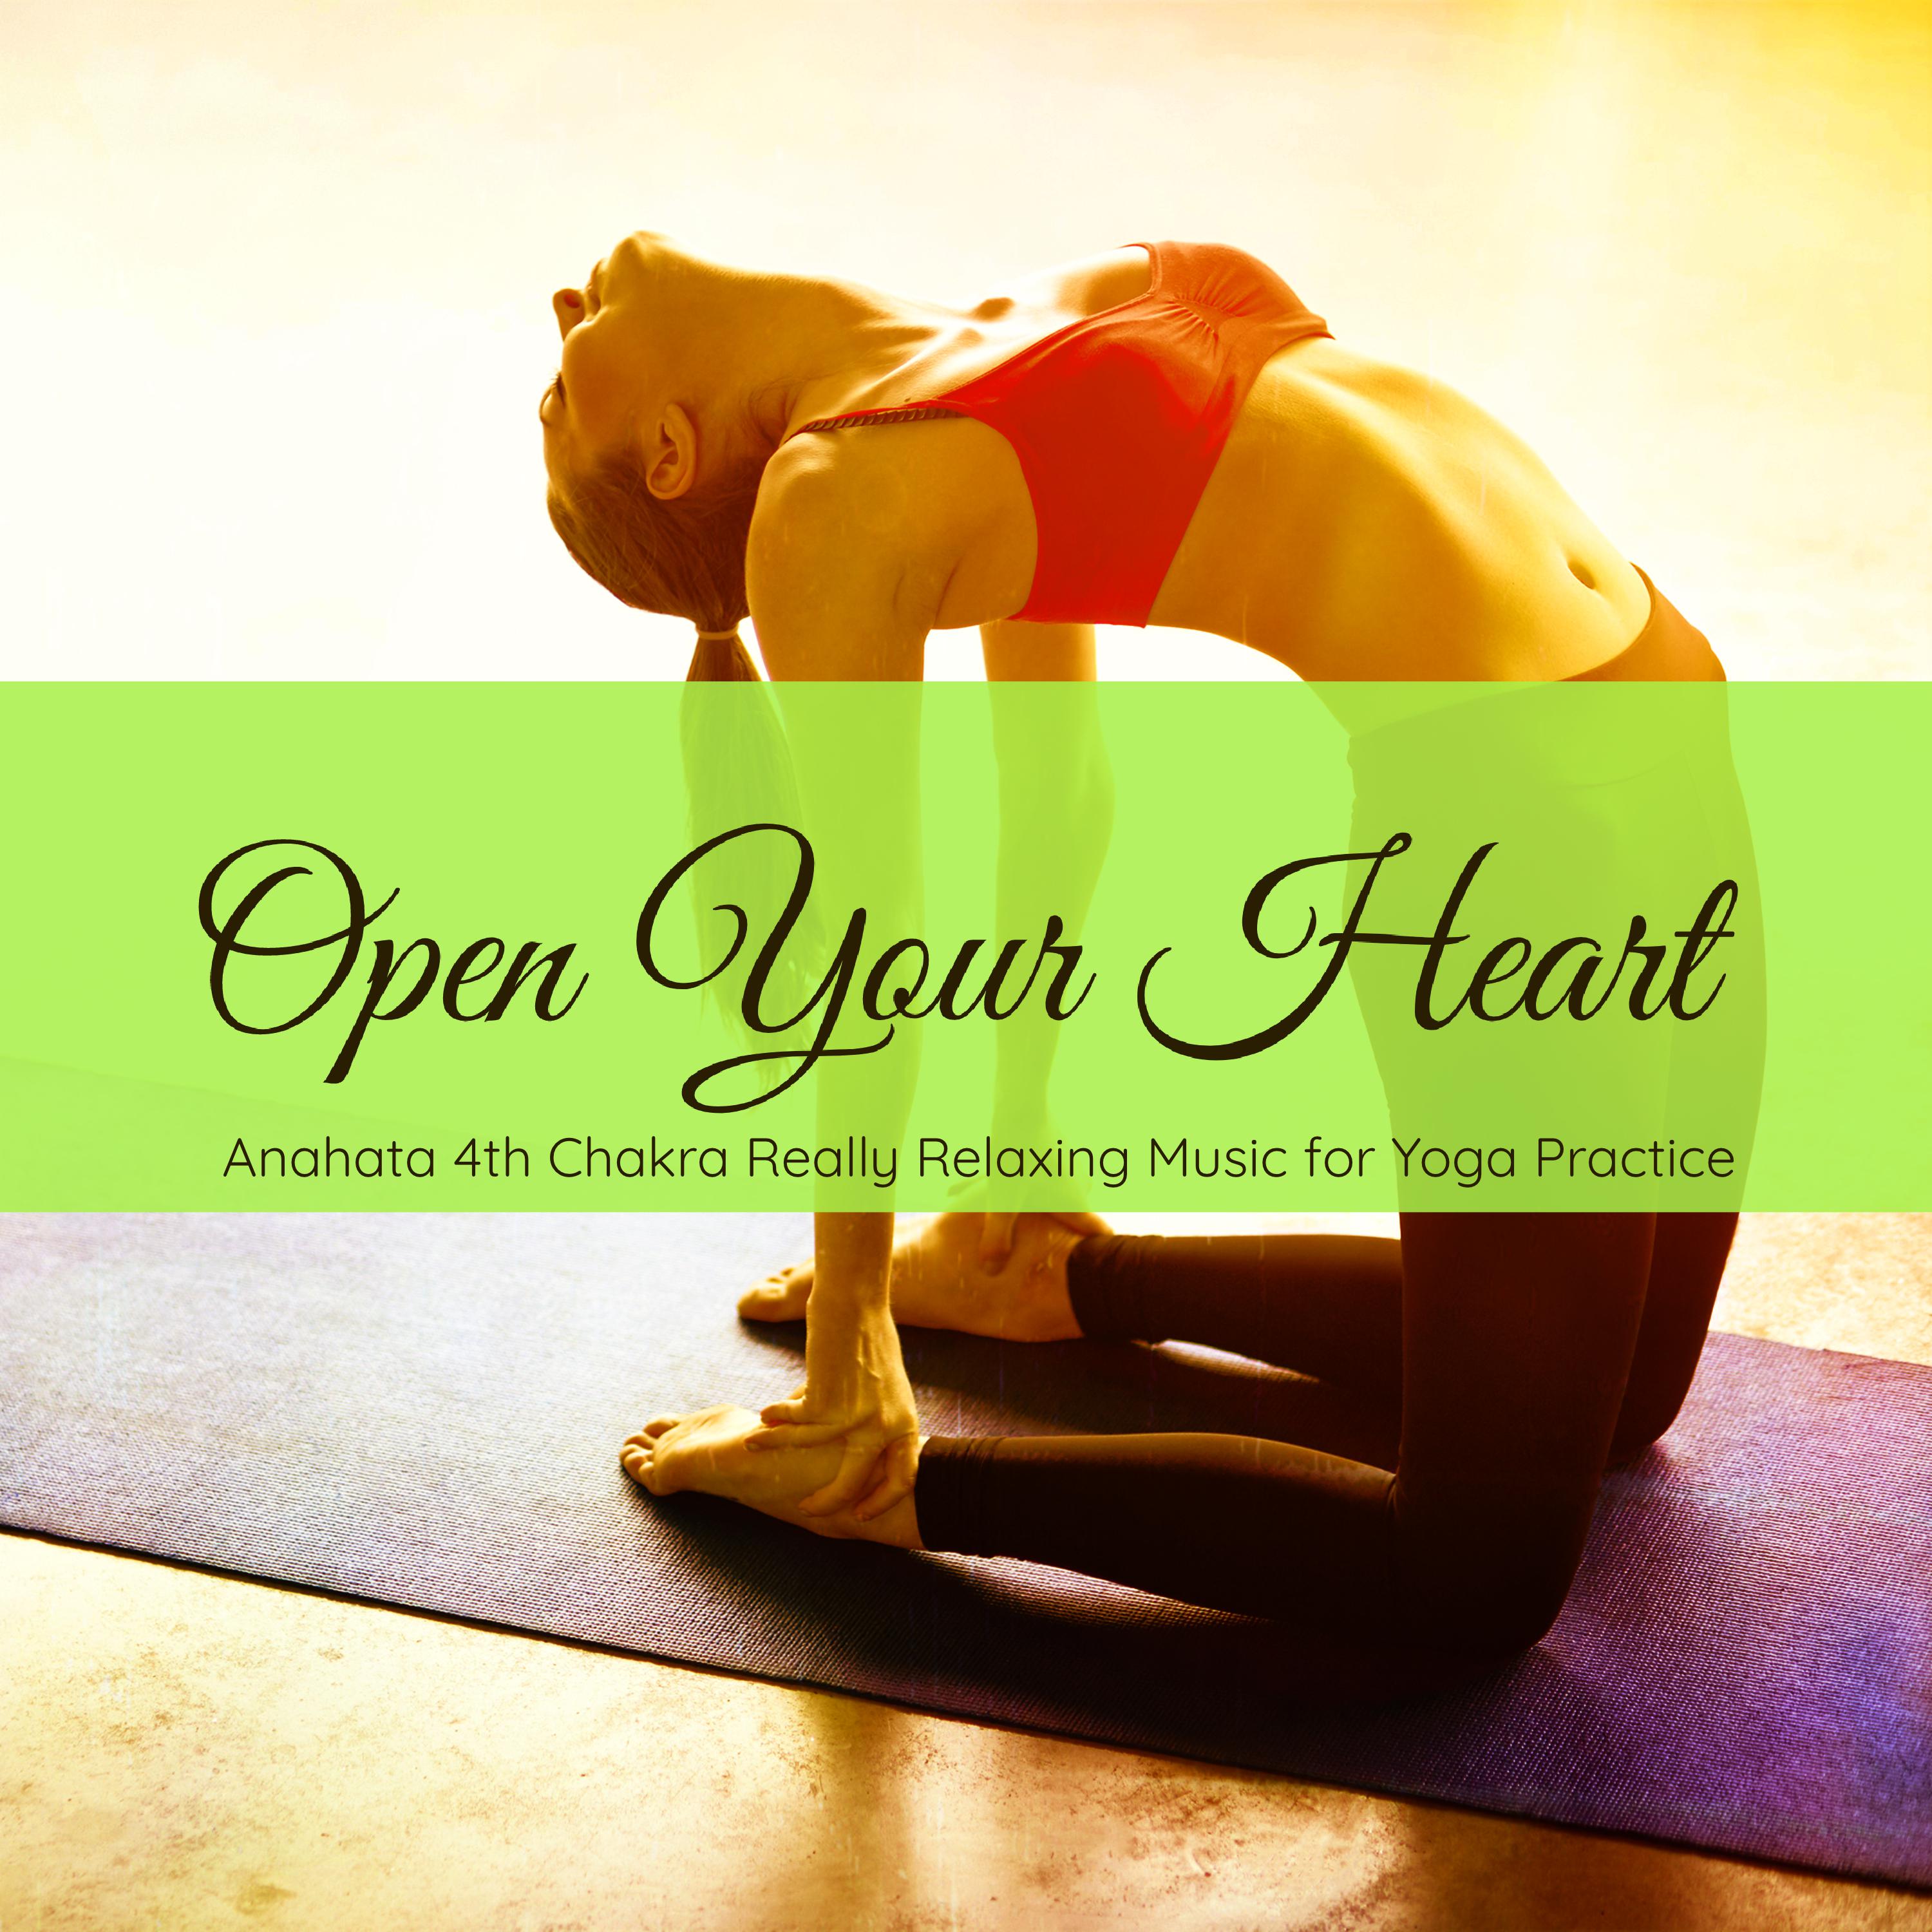 Open Your Heart  Anahata 4th Chakra Really Relaxing Music for Yoga Practice